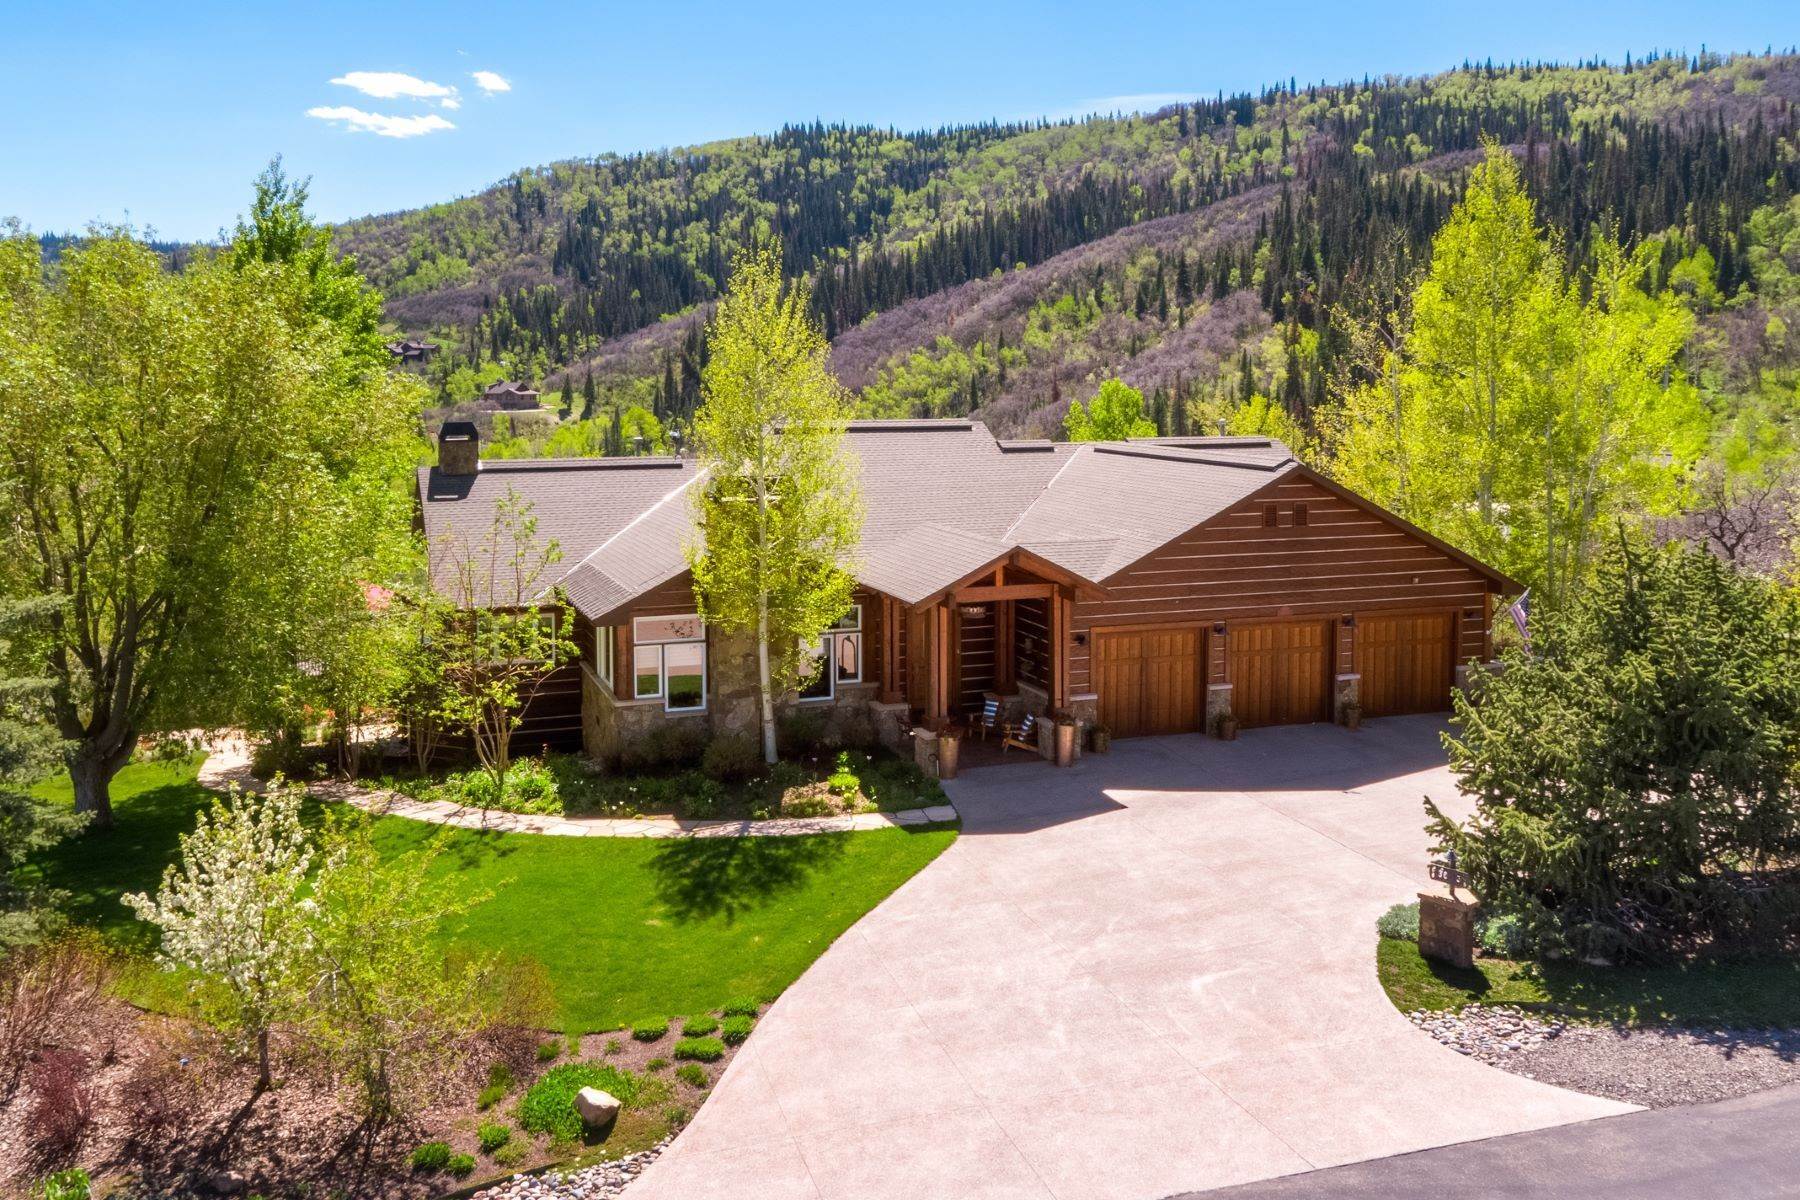 Single Family Homes for Active at Top of the World Views 36115 QUARRY RIDGE ROAD Steamboat Springs, Colorado 80487 United States